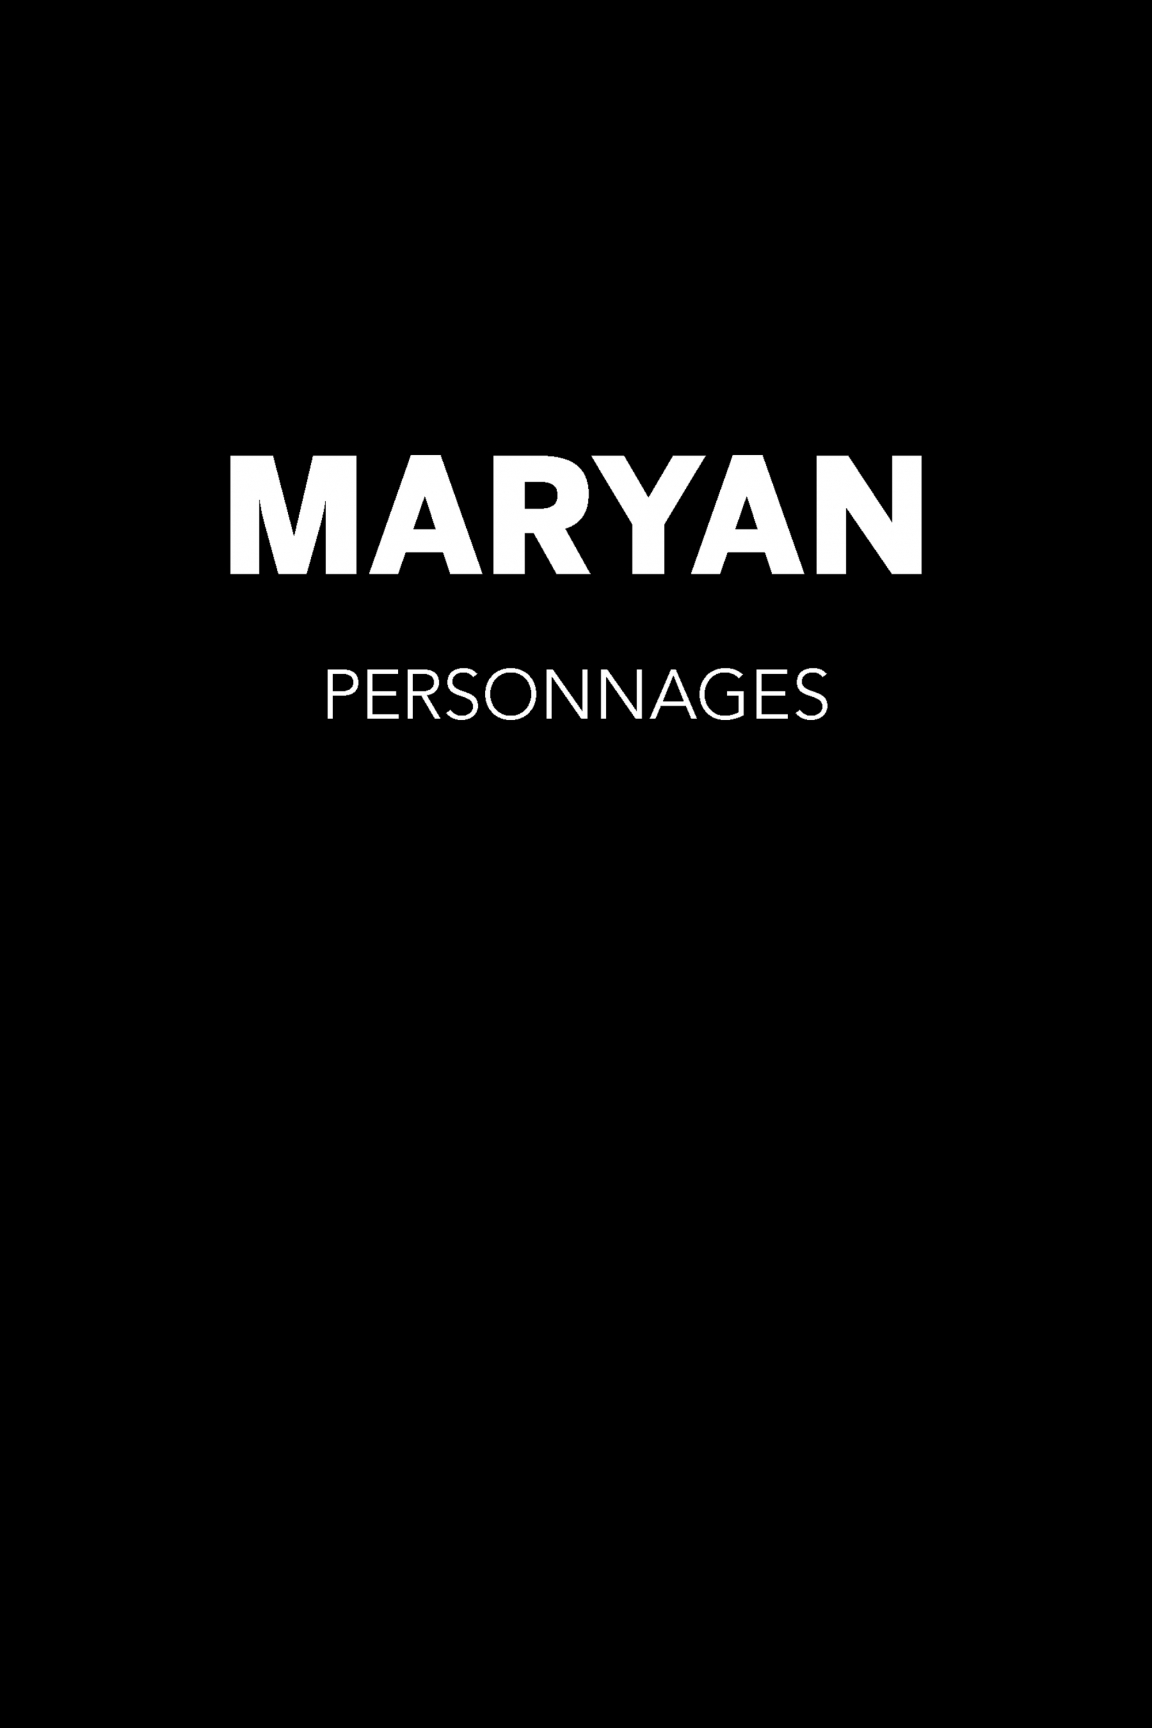 Cover of Maryann: Personnages, published by Venus Over Manhattan, New York, 2018